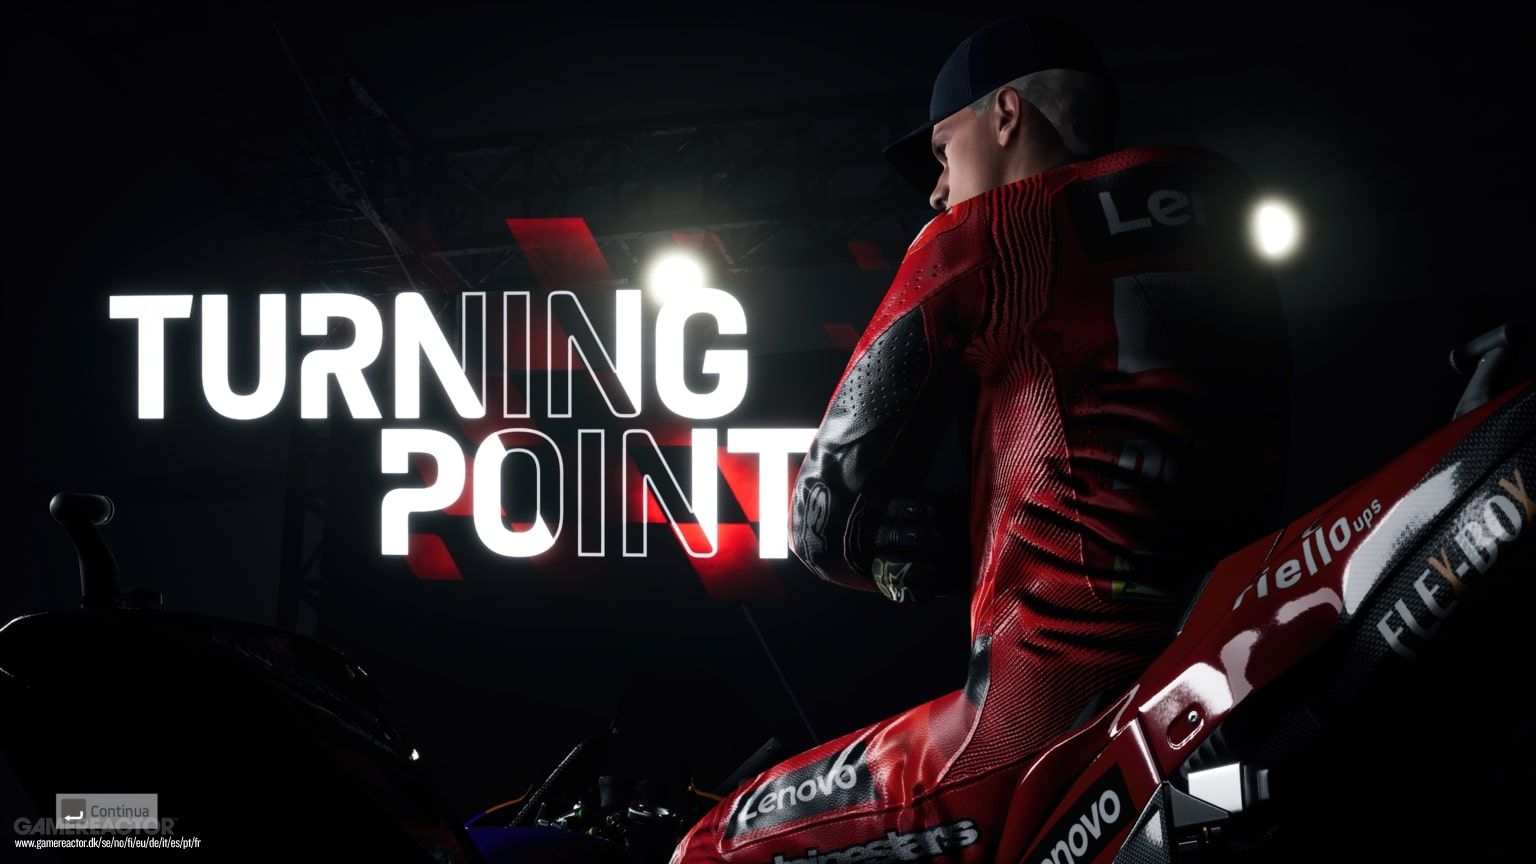 MotoGP 23 career mode comes with a makeover to be much more realistic and immersive